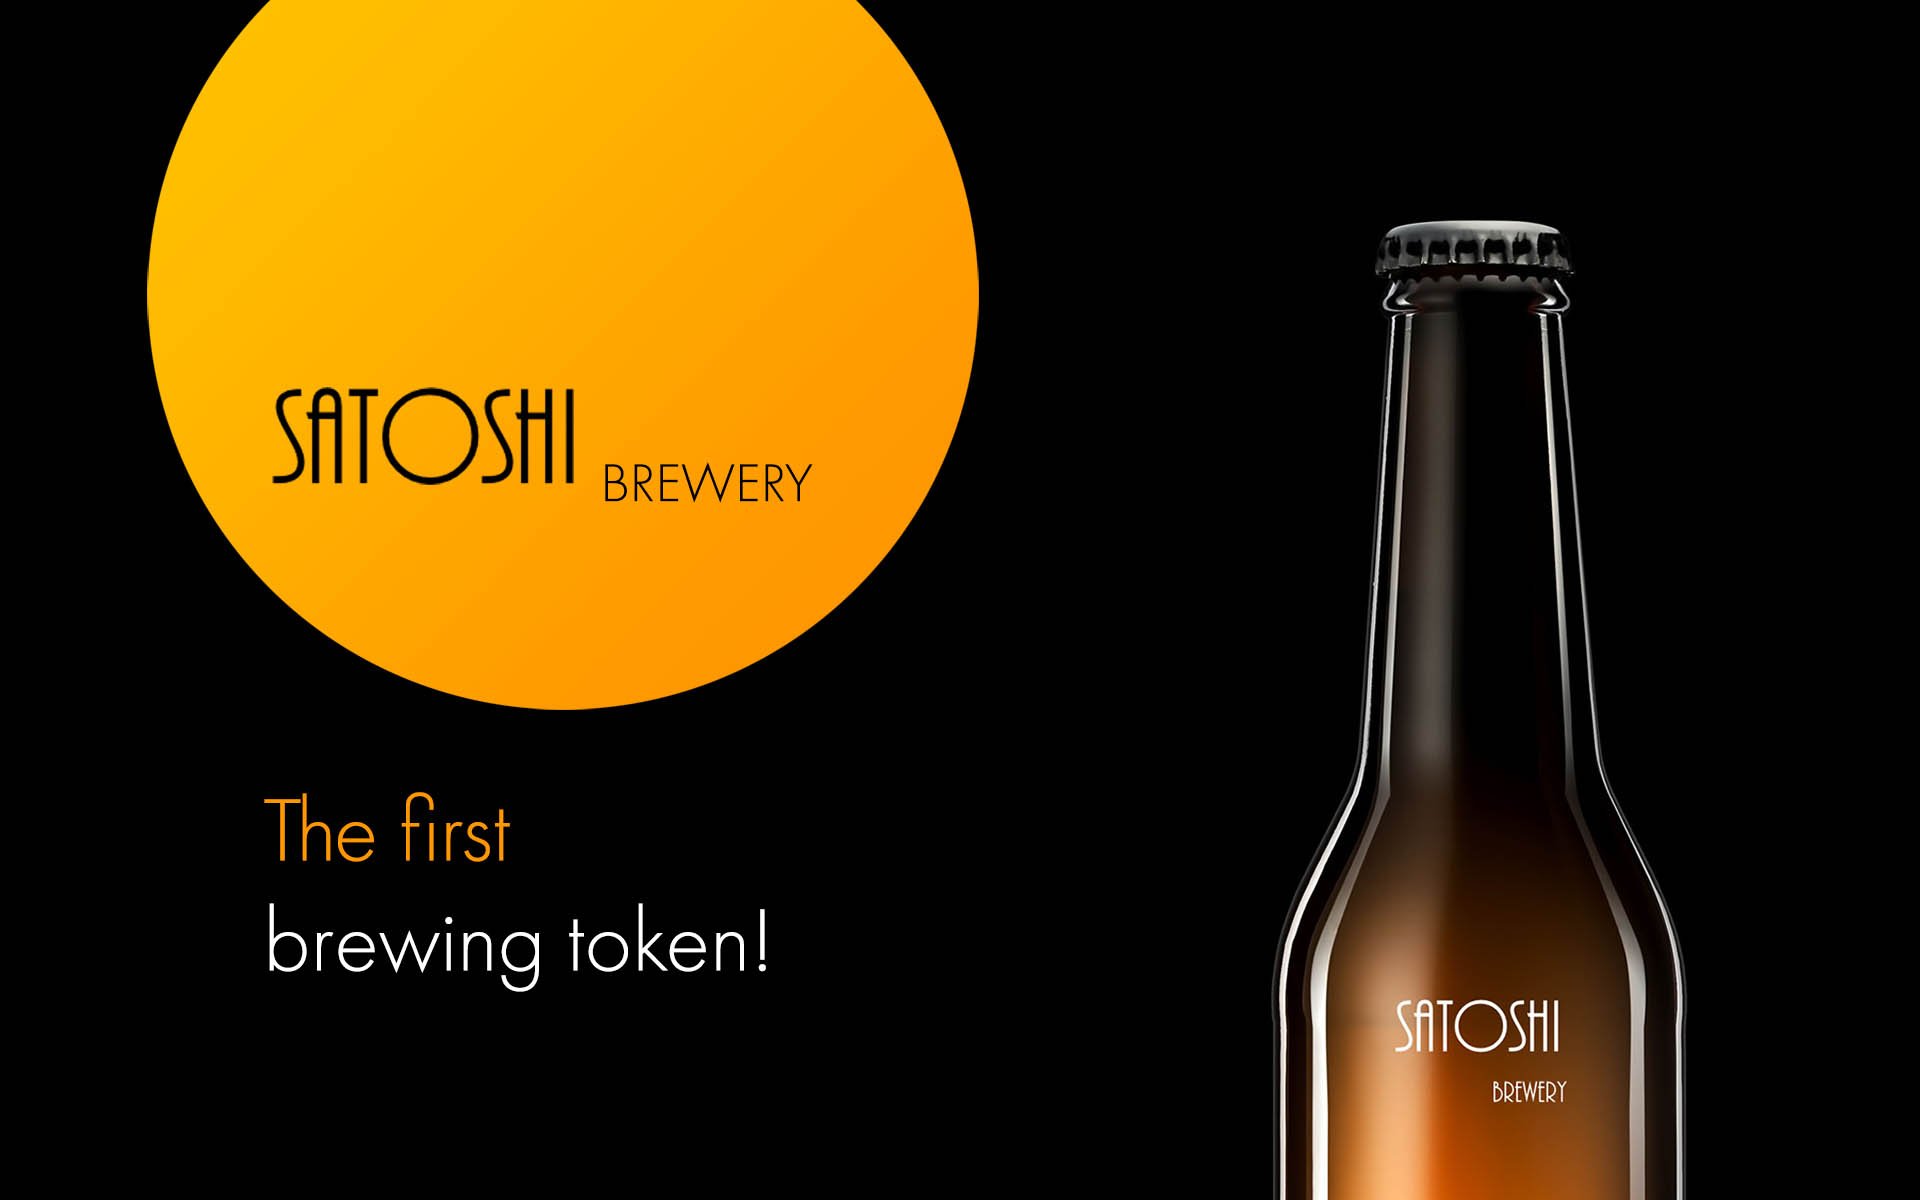 Only 5 Days Left to Buy Tokens of the Most Innovative Brewery in Russia with 44% Profit